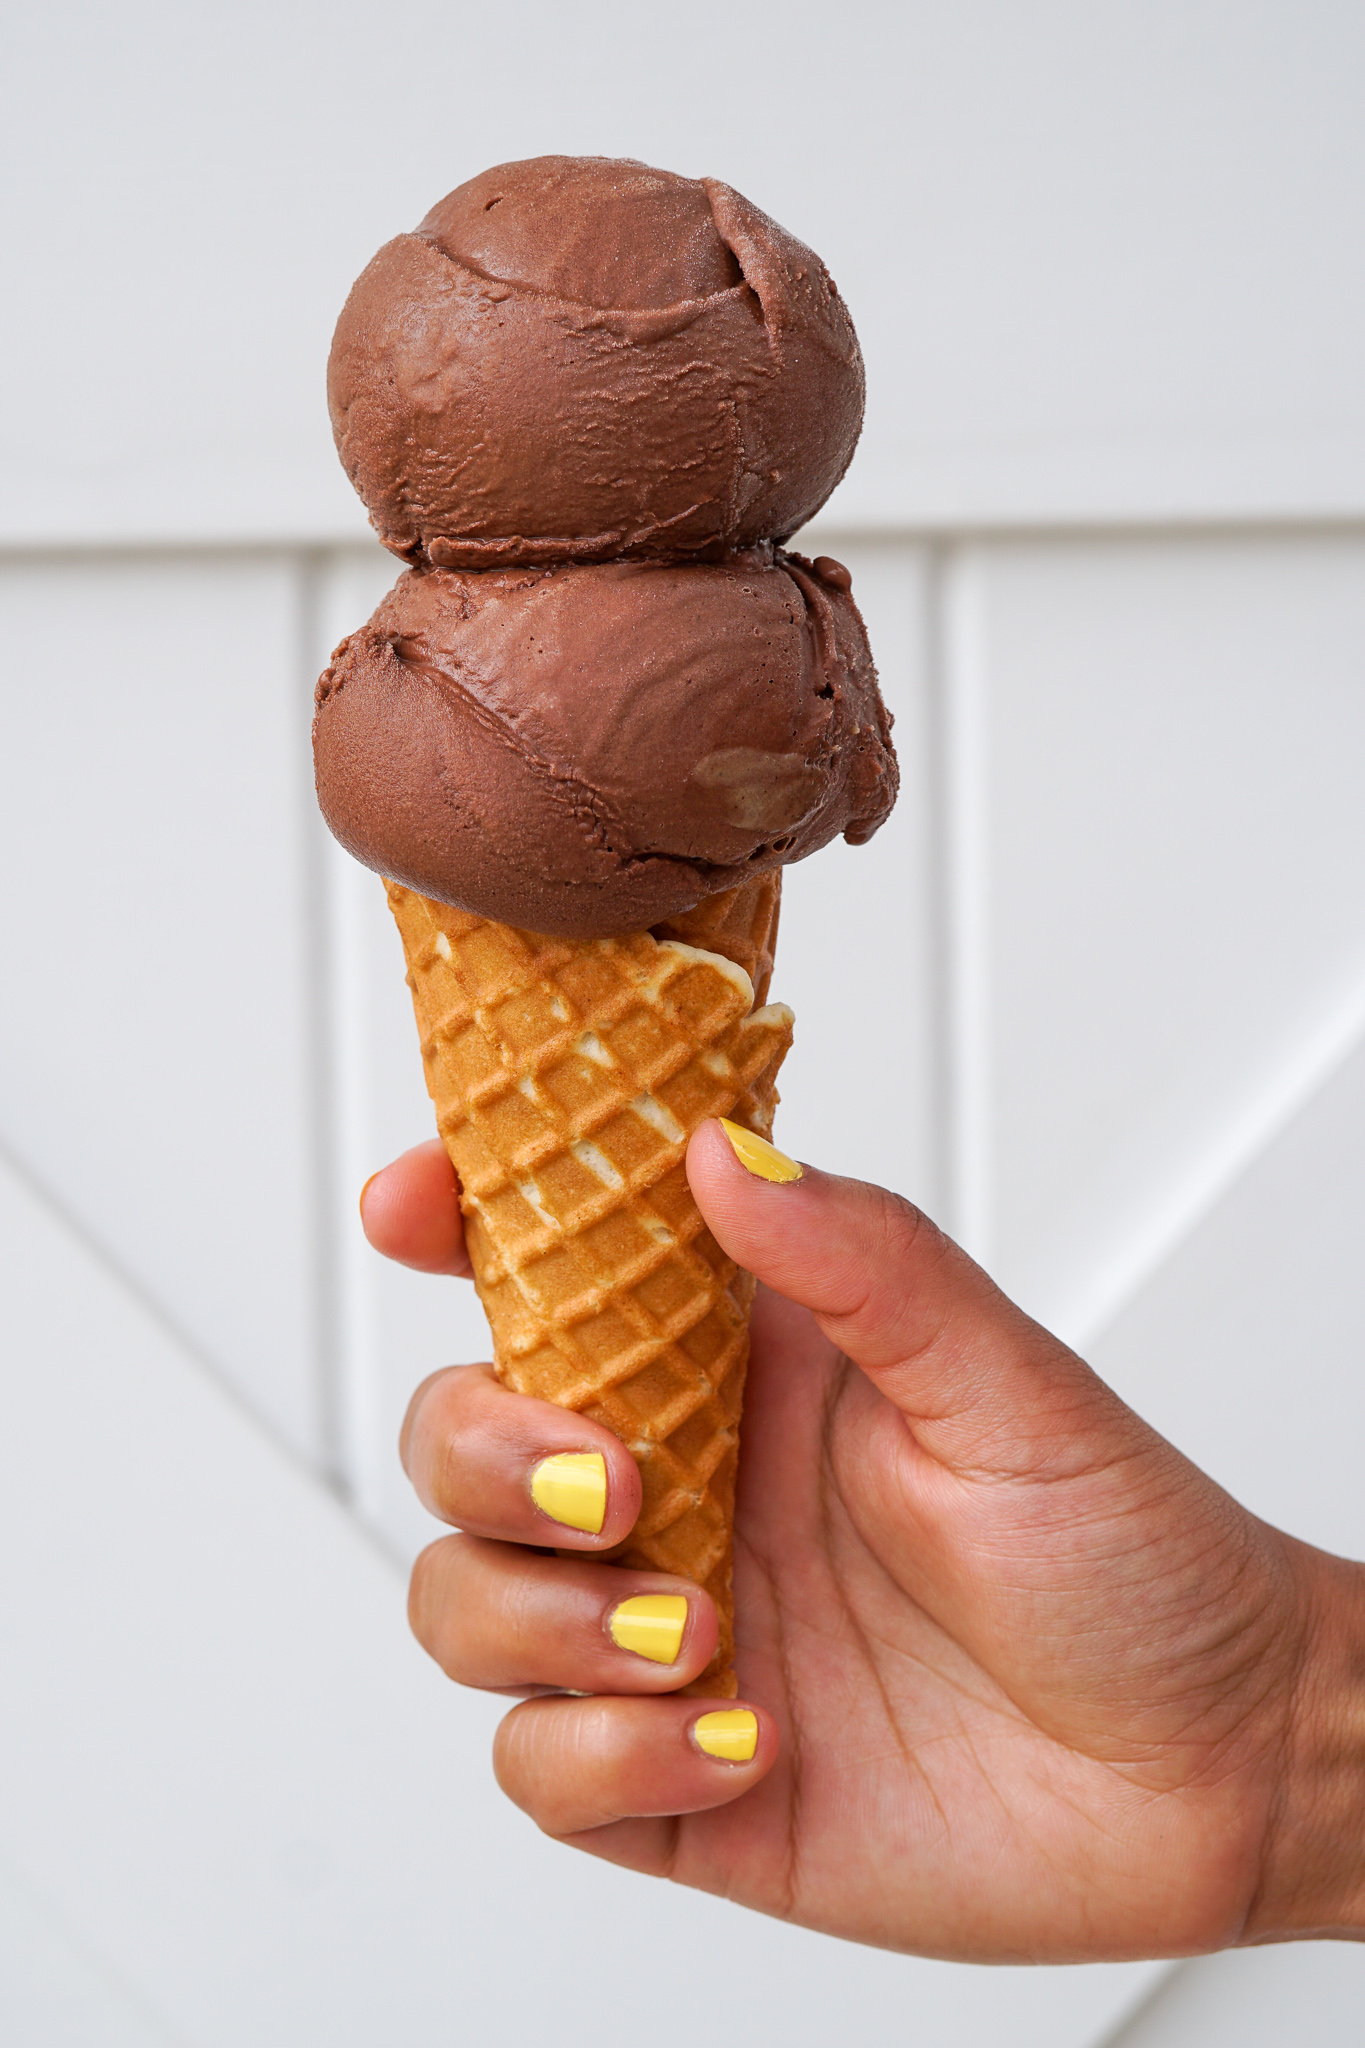 Woman's hand holding a vanilla cone topped with 2 scoops of Chocolate ice cream